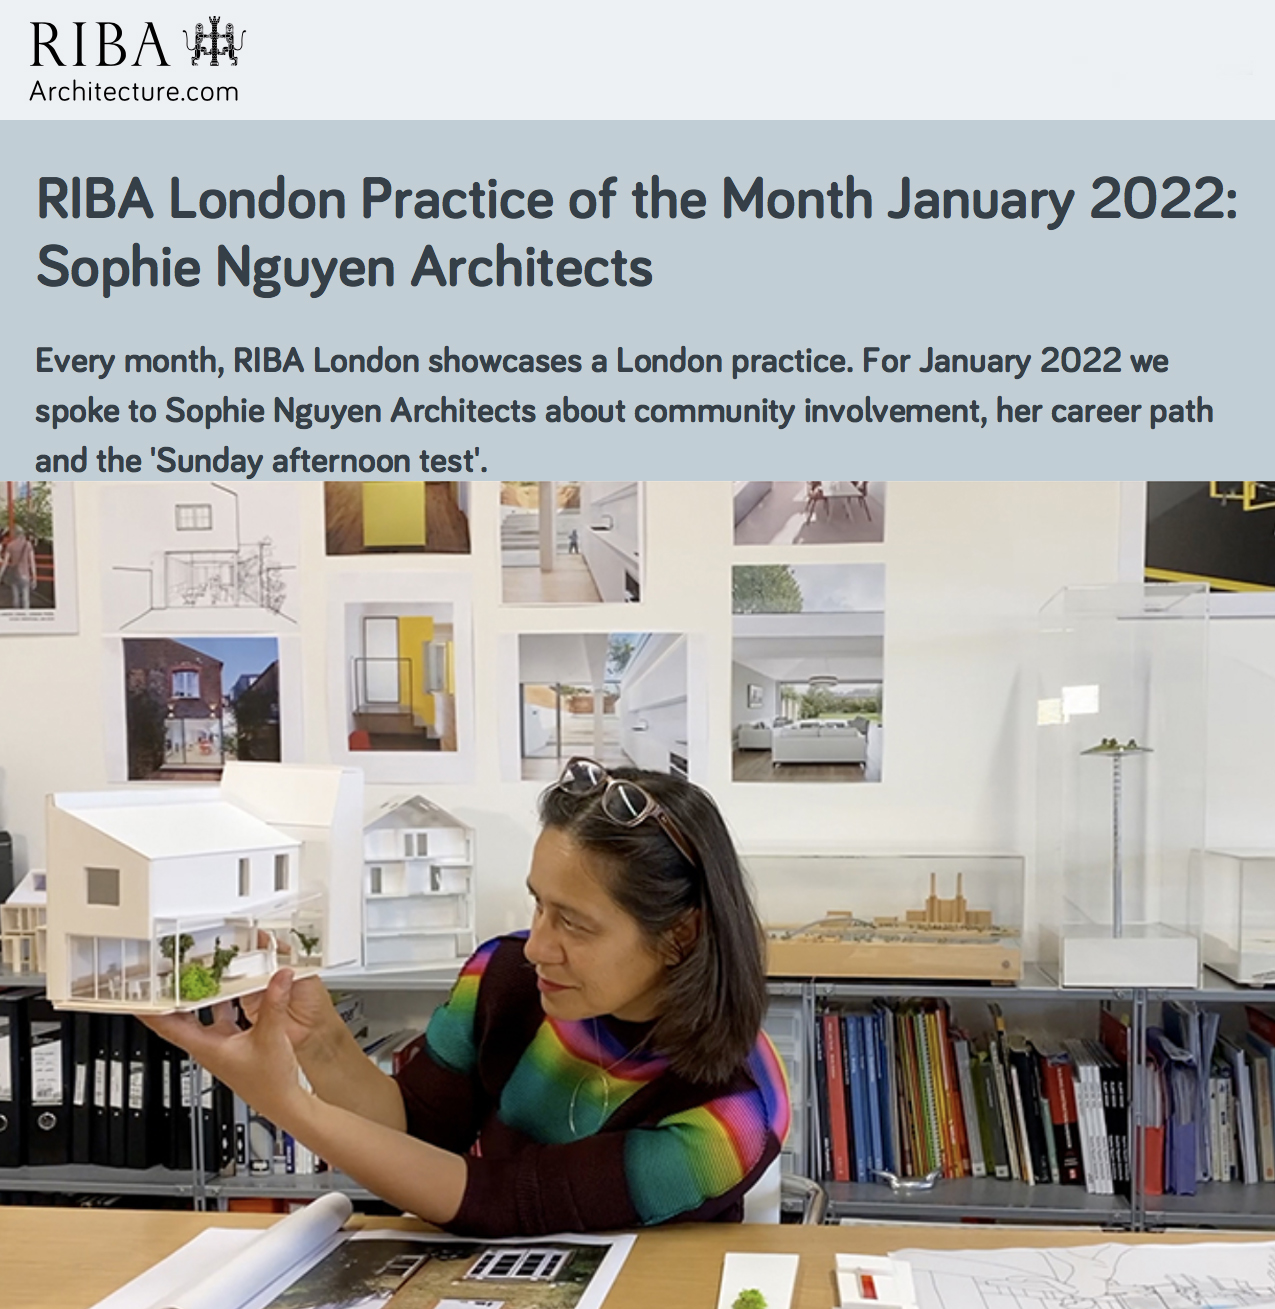 RIBA London Practice of the Month January 2022: Sophie Nguyen Architects